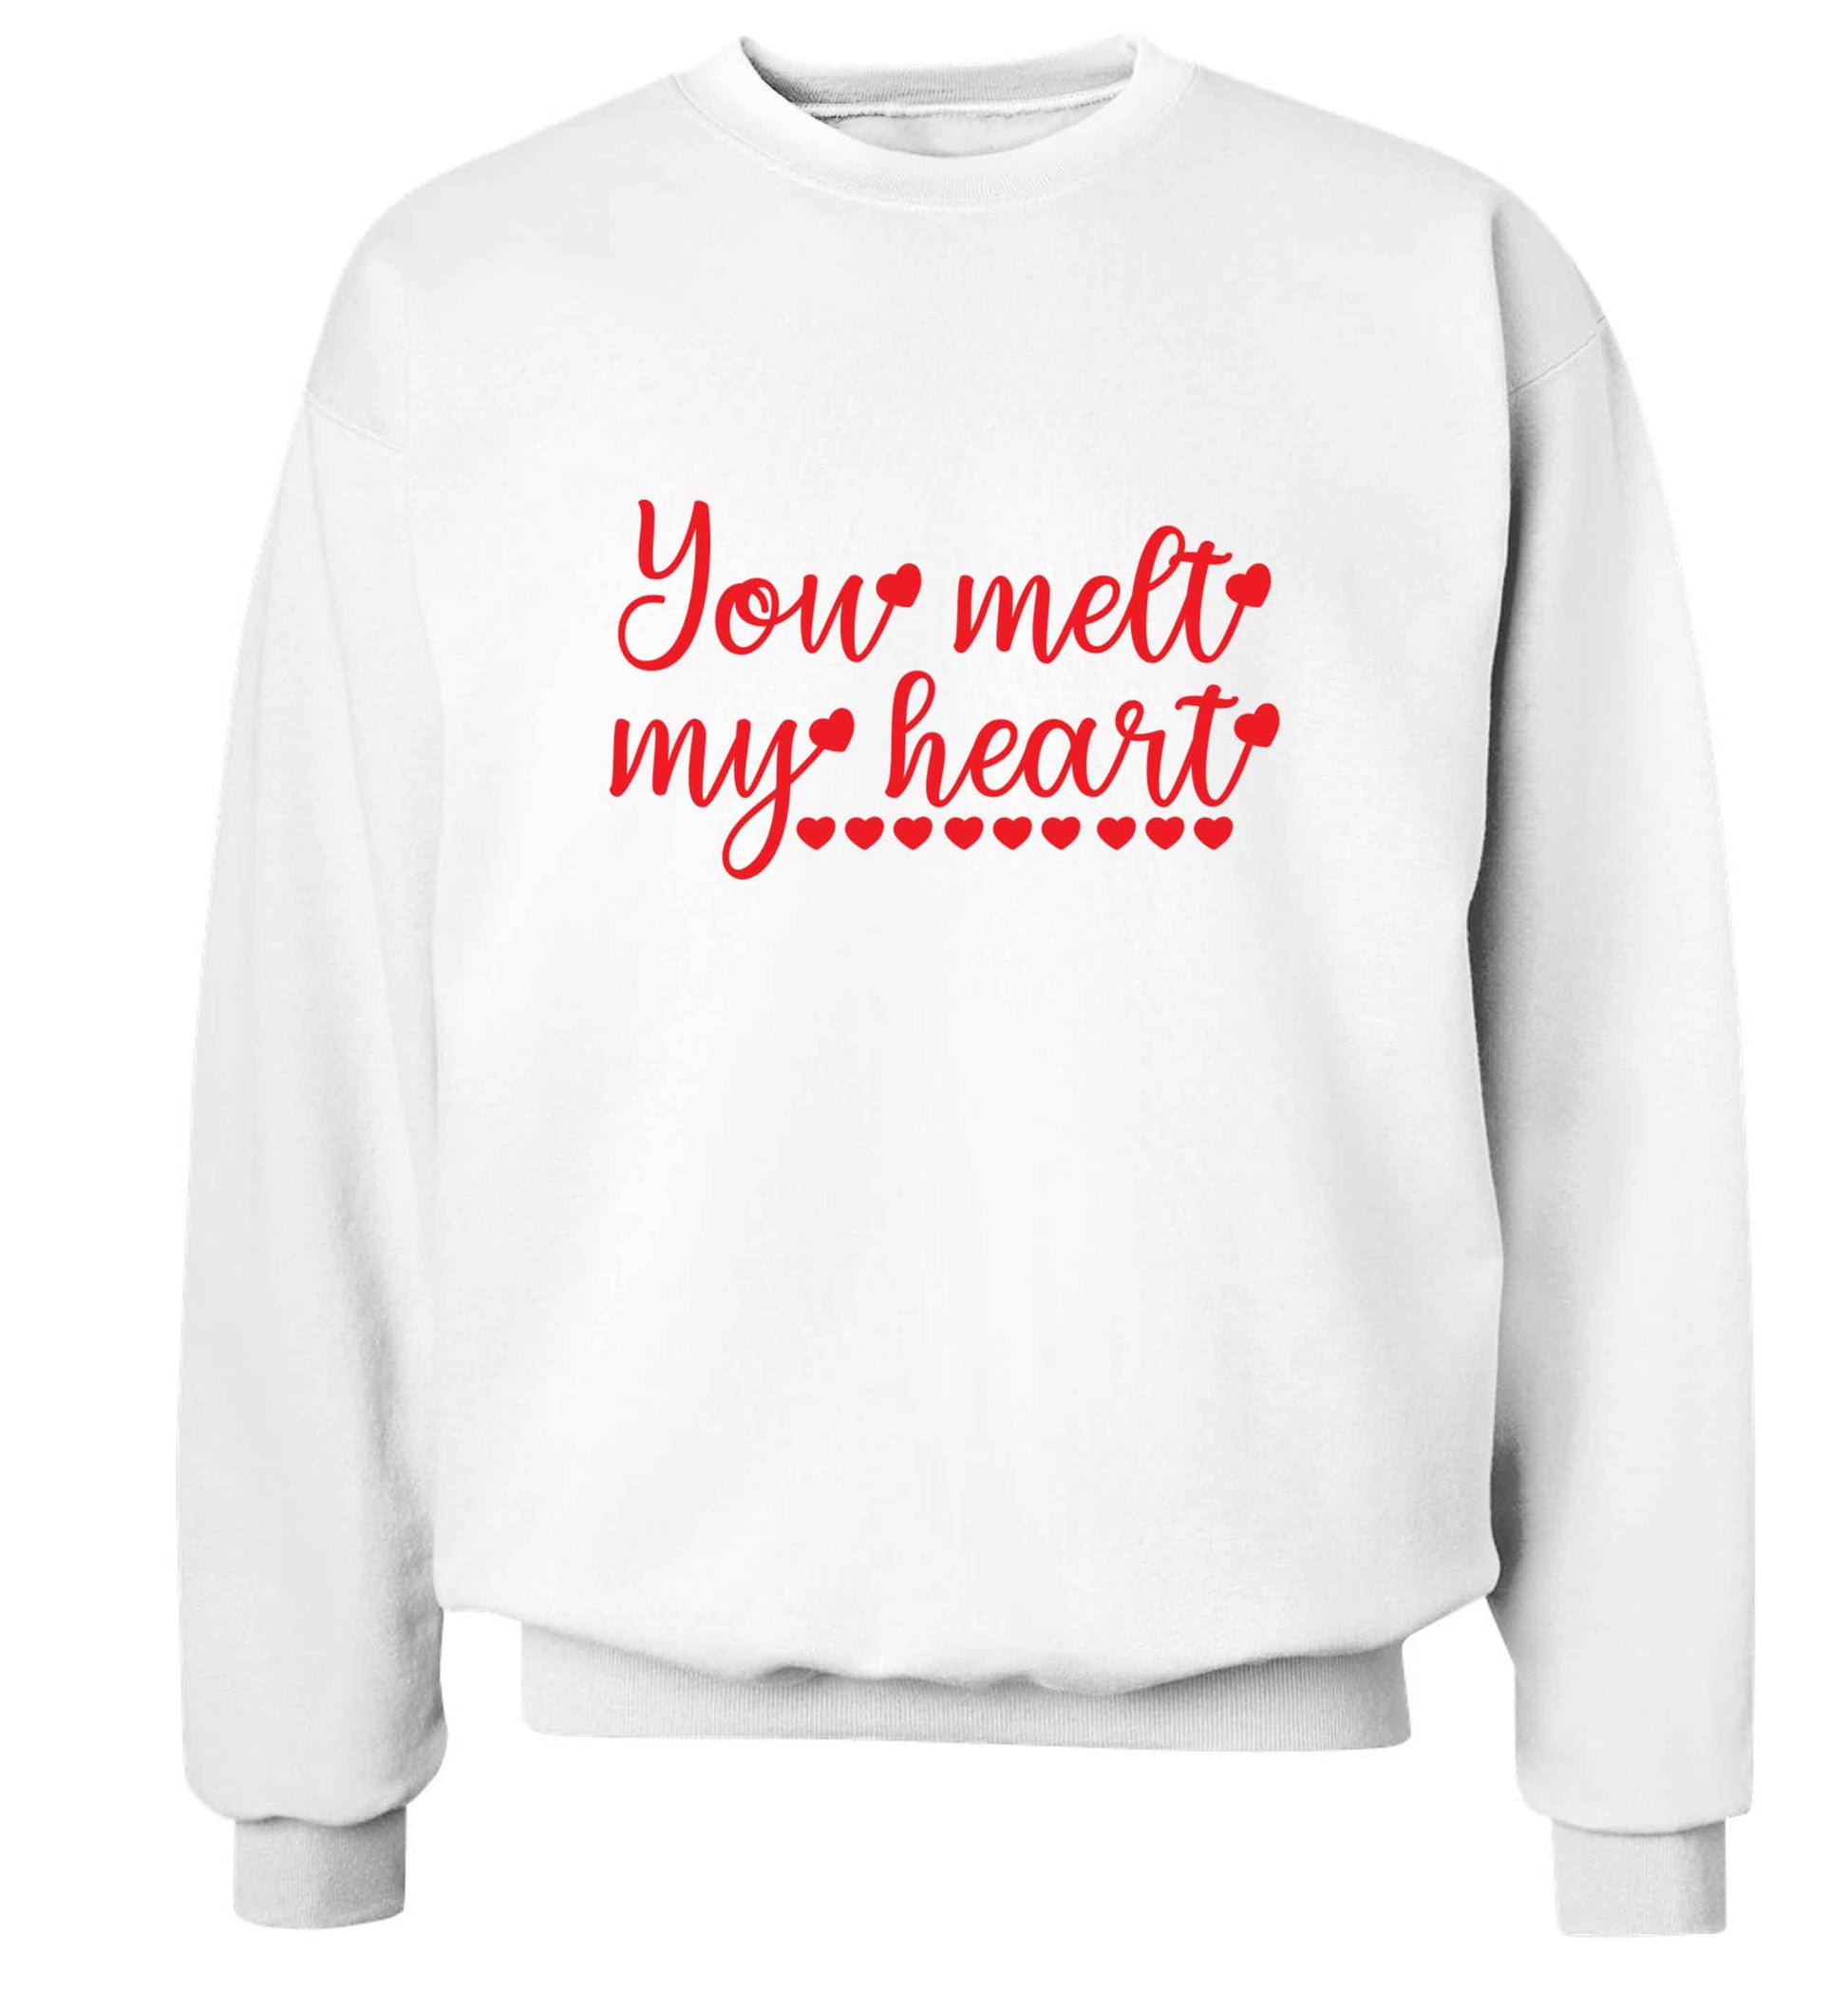 You melt my heart adult's unisex white sweater 2XL